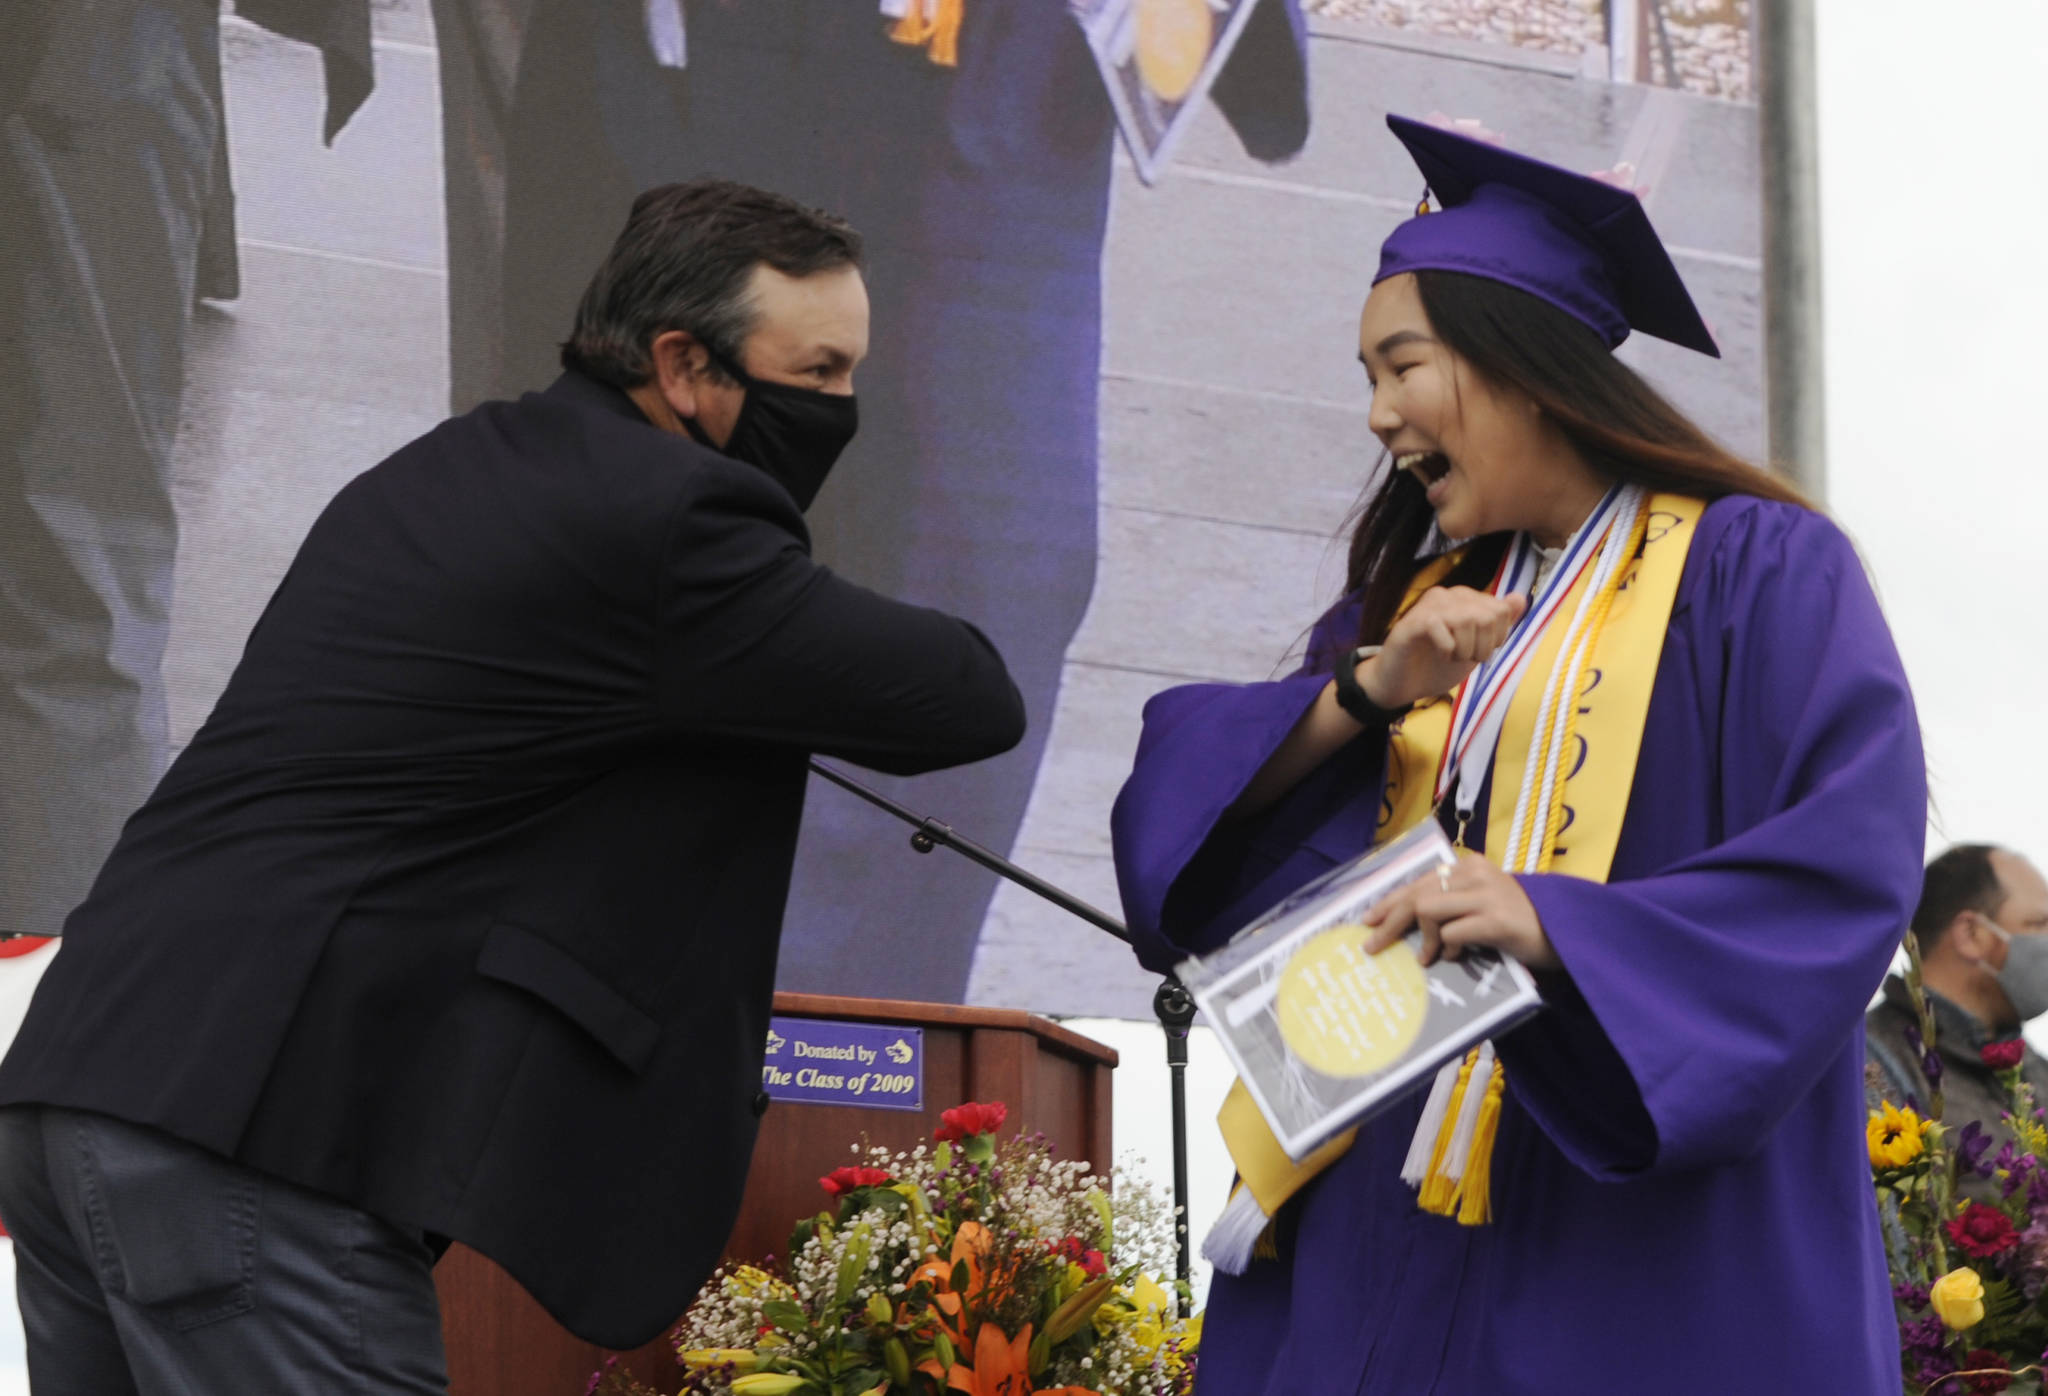 Michael Dashiell /Olympic Peninsula News Group                                After receiving her diploma, class president Erin Dwyer gets an elbow bump from Sequim High School principal Shawn Langston at Friday’s SHS commencement ceremony. Sequim Gazette photo by Michael Dashiell